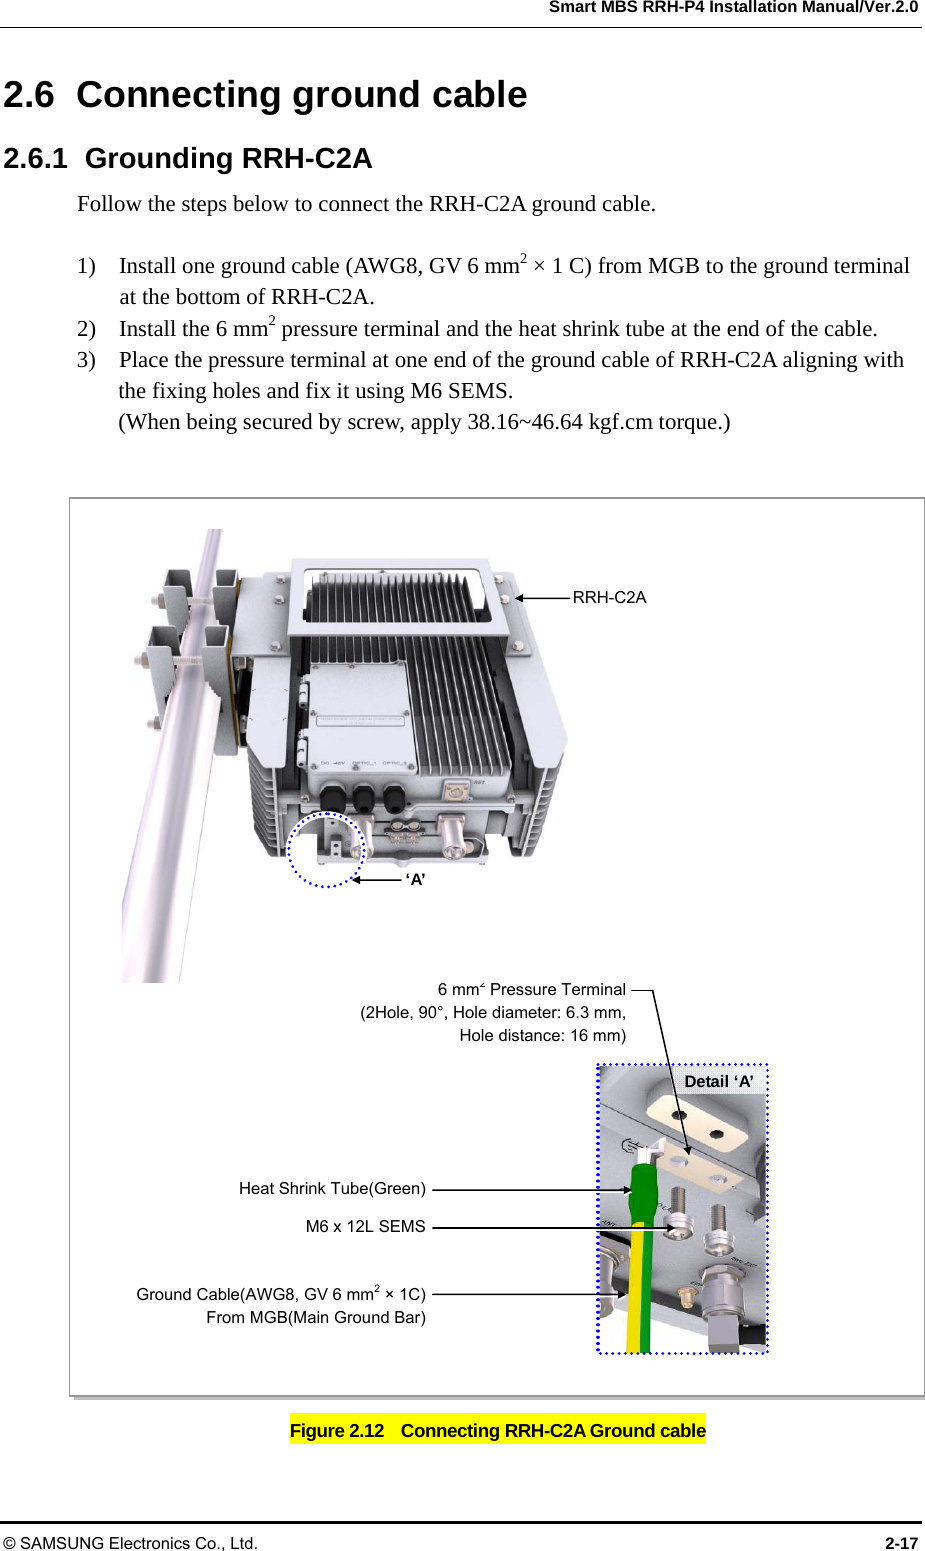  Smart MBS RRH-P4 Installation Manual/Ver.2.0 © SAMSUNG Electronics Co., Ltd.  2-17 2.6 Connecting ground cable 2.6.1 Grounding RRH-C2A Follow the steps below to connect the RRH-C2A ground cable.  1)    Install one ground cable (AWG8, GV 6 mm2 × 1 C) from MGB to the ground terminal at the bottom of RRH-C2A. 2)    Install the 6 mm2 pressure terminal and the heat shrink tube at the end of the cable. 3)    Place the pressure terminal at one end of the ground cable of RRH-C2A aligning with the fixing holes and fix it using M6 SEMS. (When being secured by screw, apply 38.16~46.64 kgf.cm torque.)  Figure 2.12    Connecting RRH-C2A Ground cable M6 x 12L SEMSGround Cable(AWG8, GV 6 mm2 × 1C)From MGB(Main Ground Bar)Detail ‘A’ Heat Shrink Tube(Green)6 mm2 Pressure Terminal(2Hole, 90°, Hole diameter: 6.3 mm,Hole distance: 16 mm)RRH-C2A ‘A’